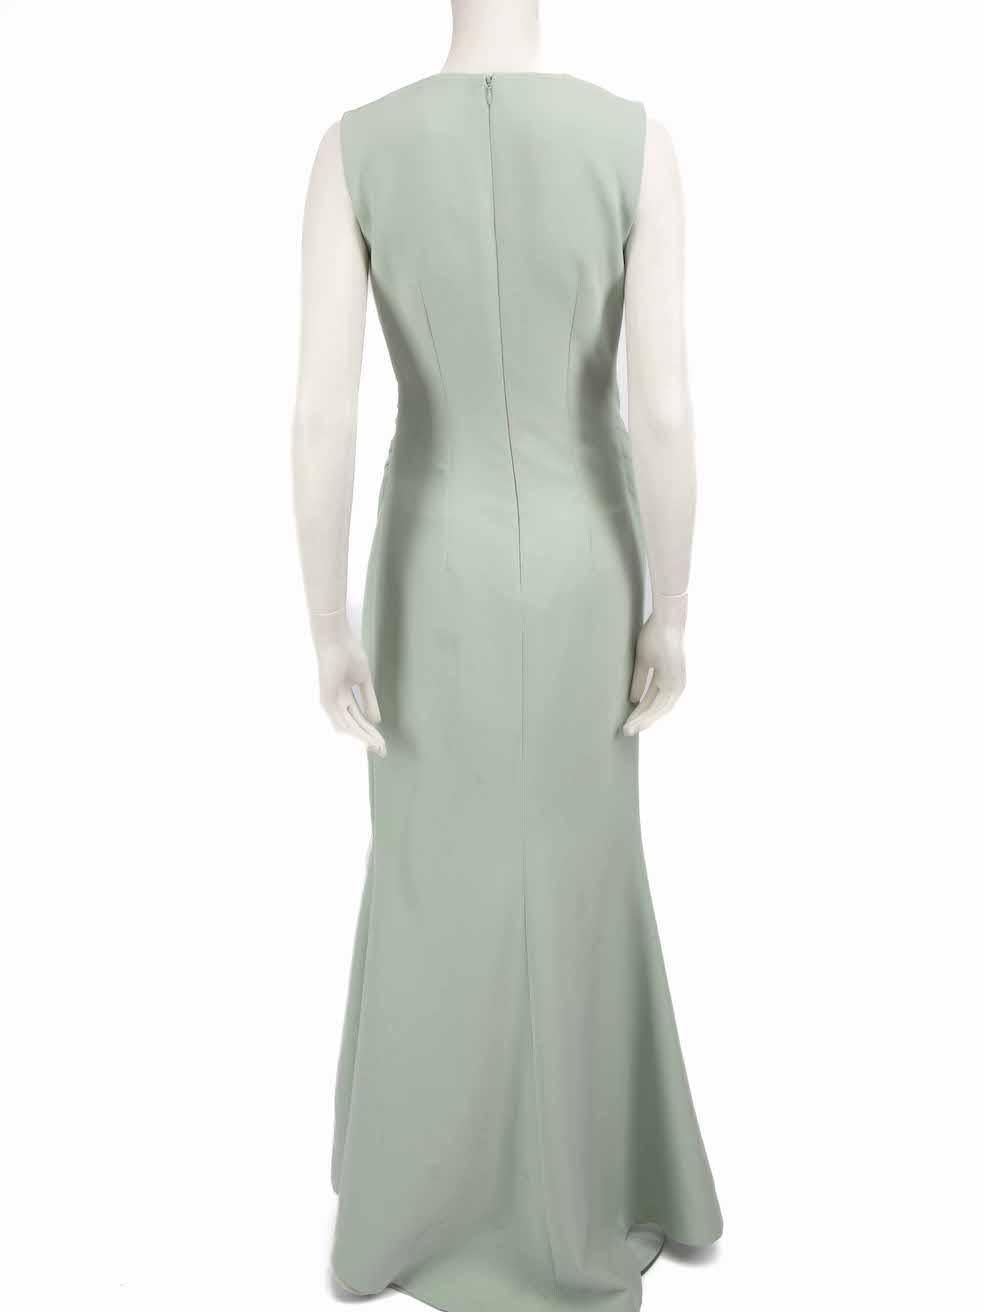 Honayda Mint Green Sleeveless Maxi Dress Size M In Good Condition For Sale In London, GB